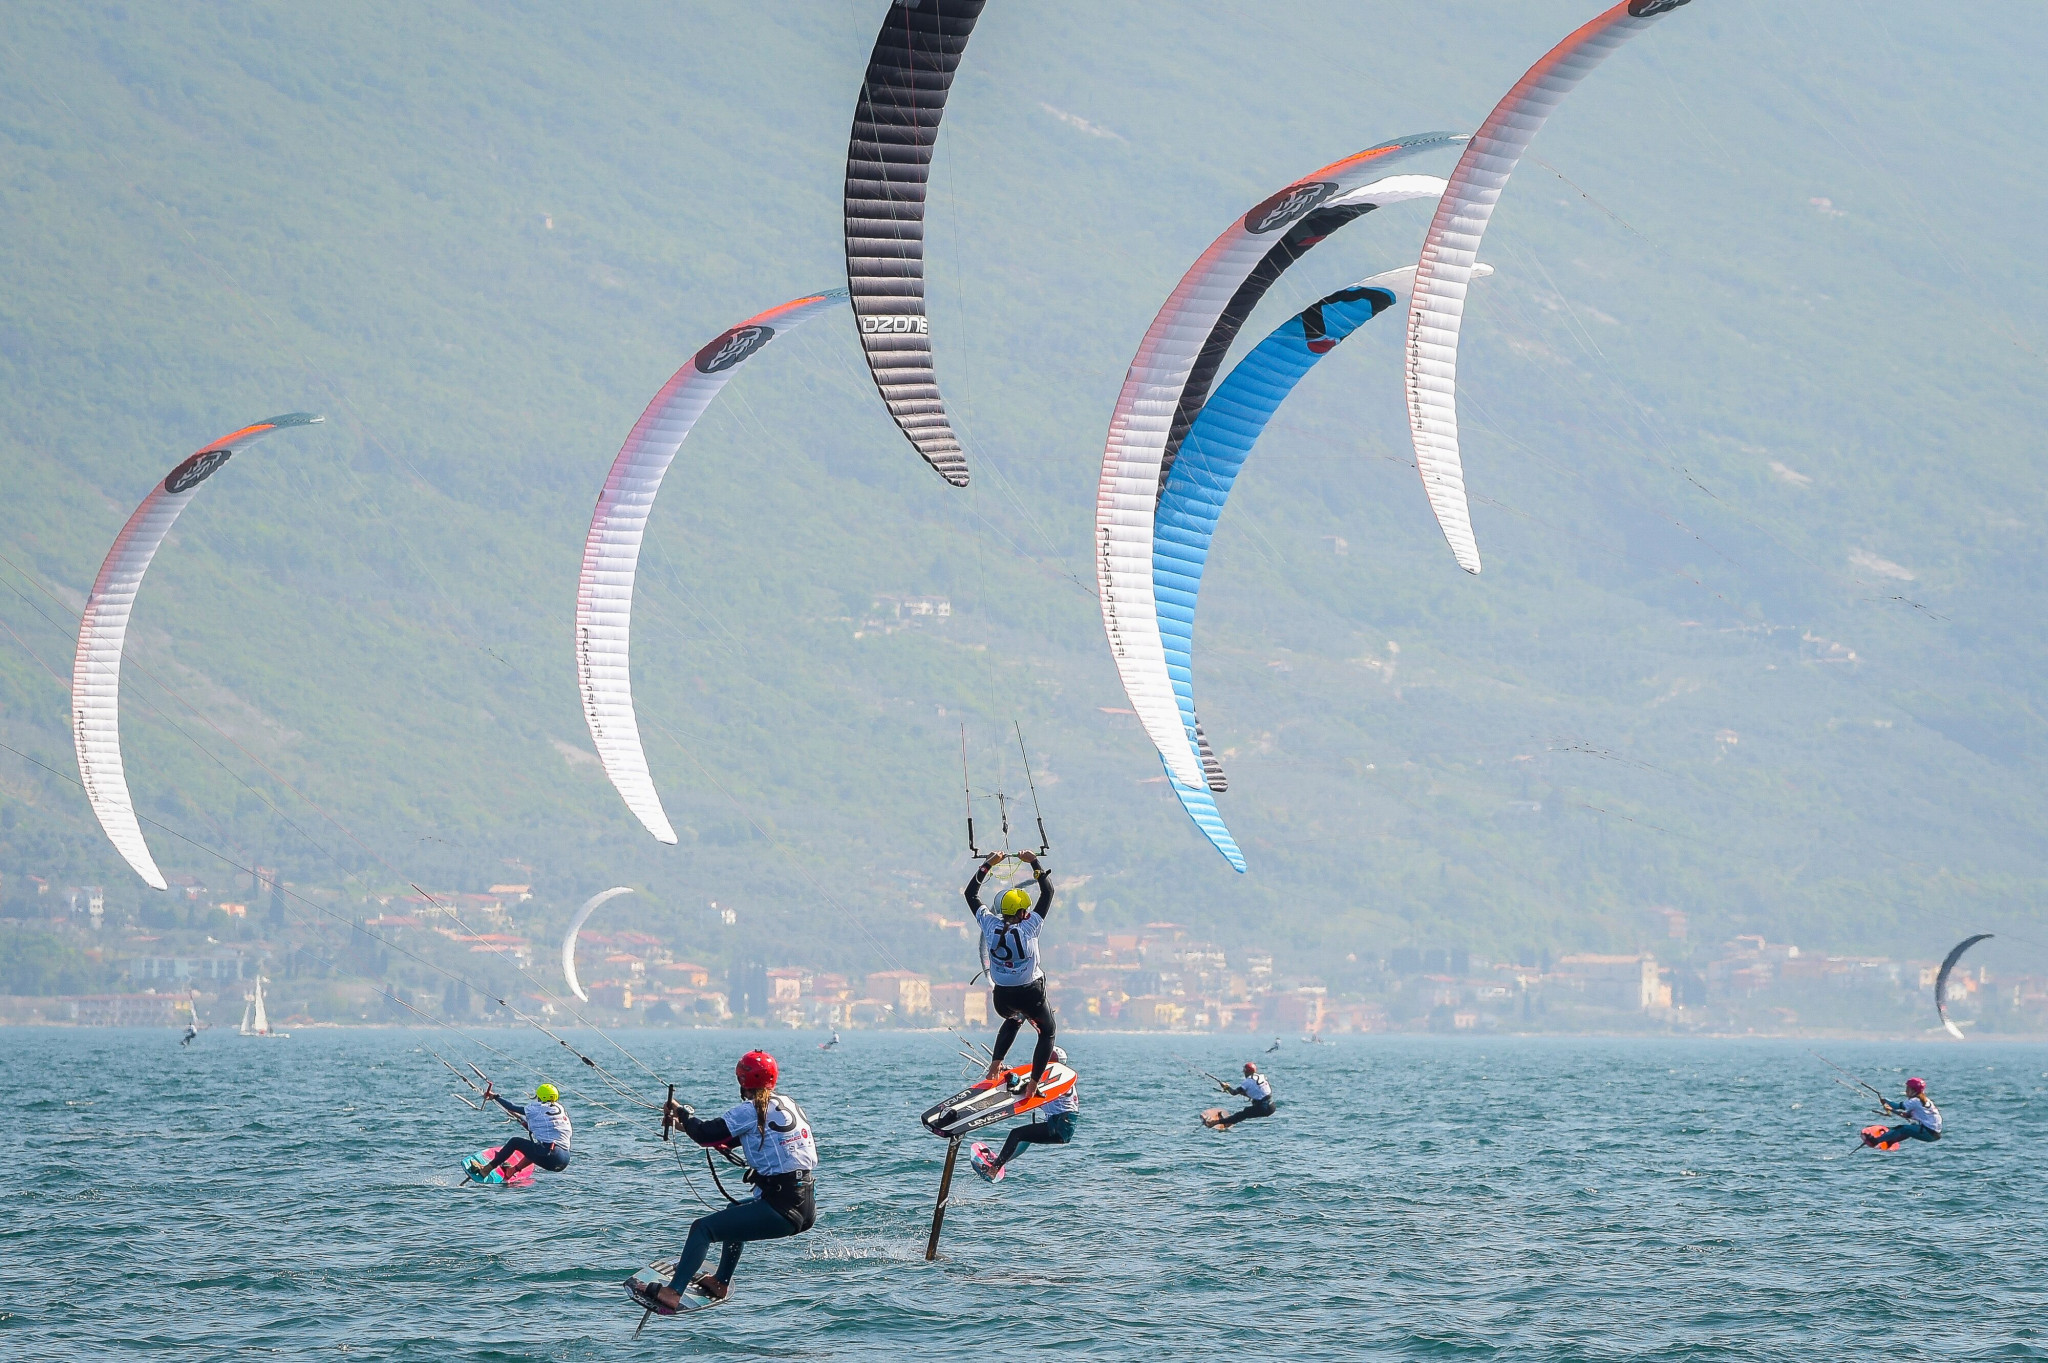 Mixed relay race format trialled at Formula Kite World Championships for Paris 2024 